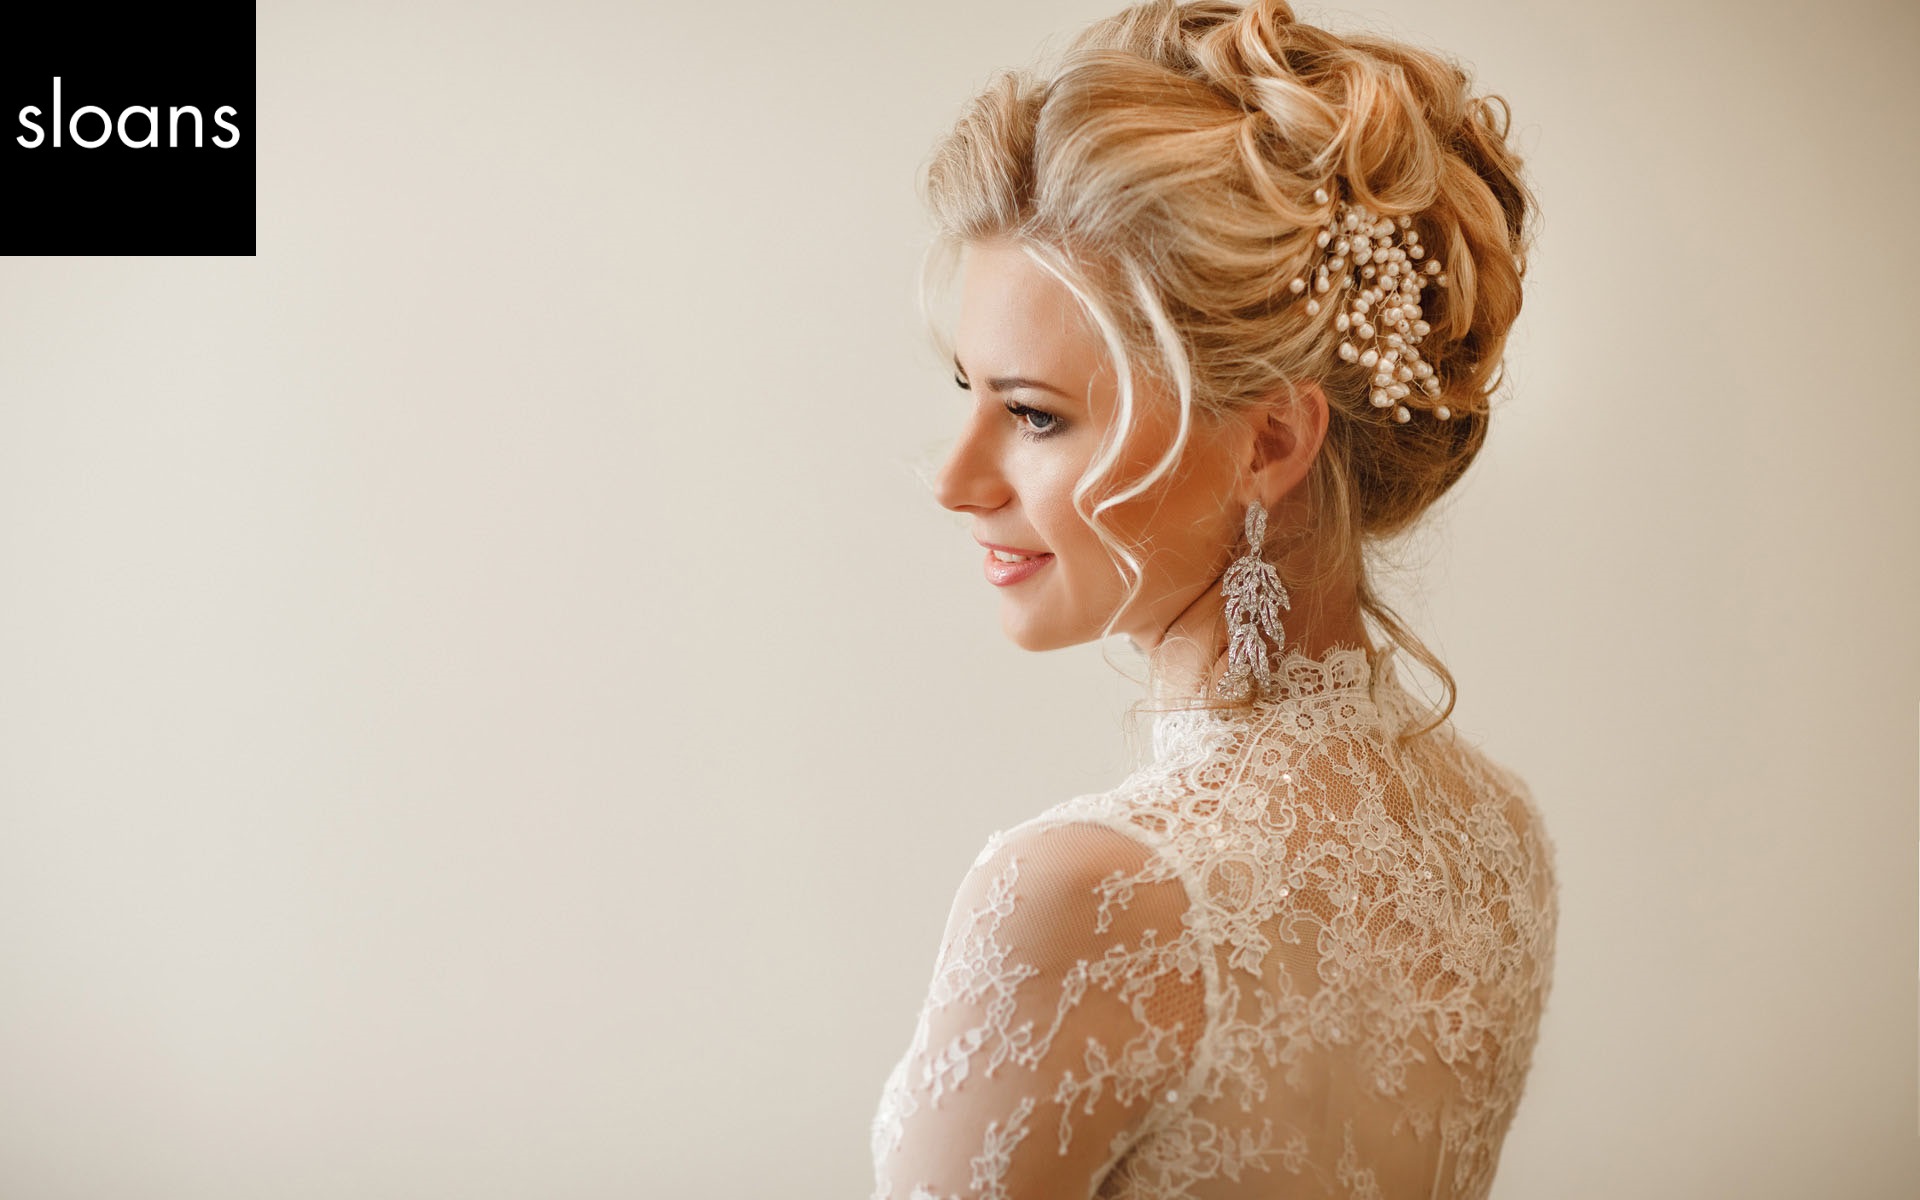 How Can a Bridal Hair Stylist Assist You in Obtaining a Classic Chignon Hairstyle